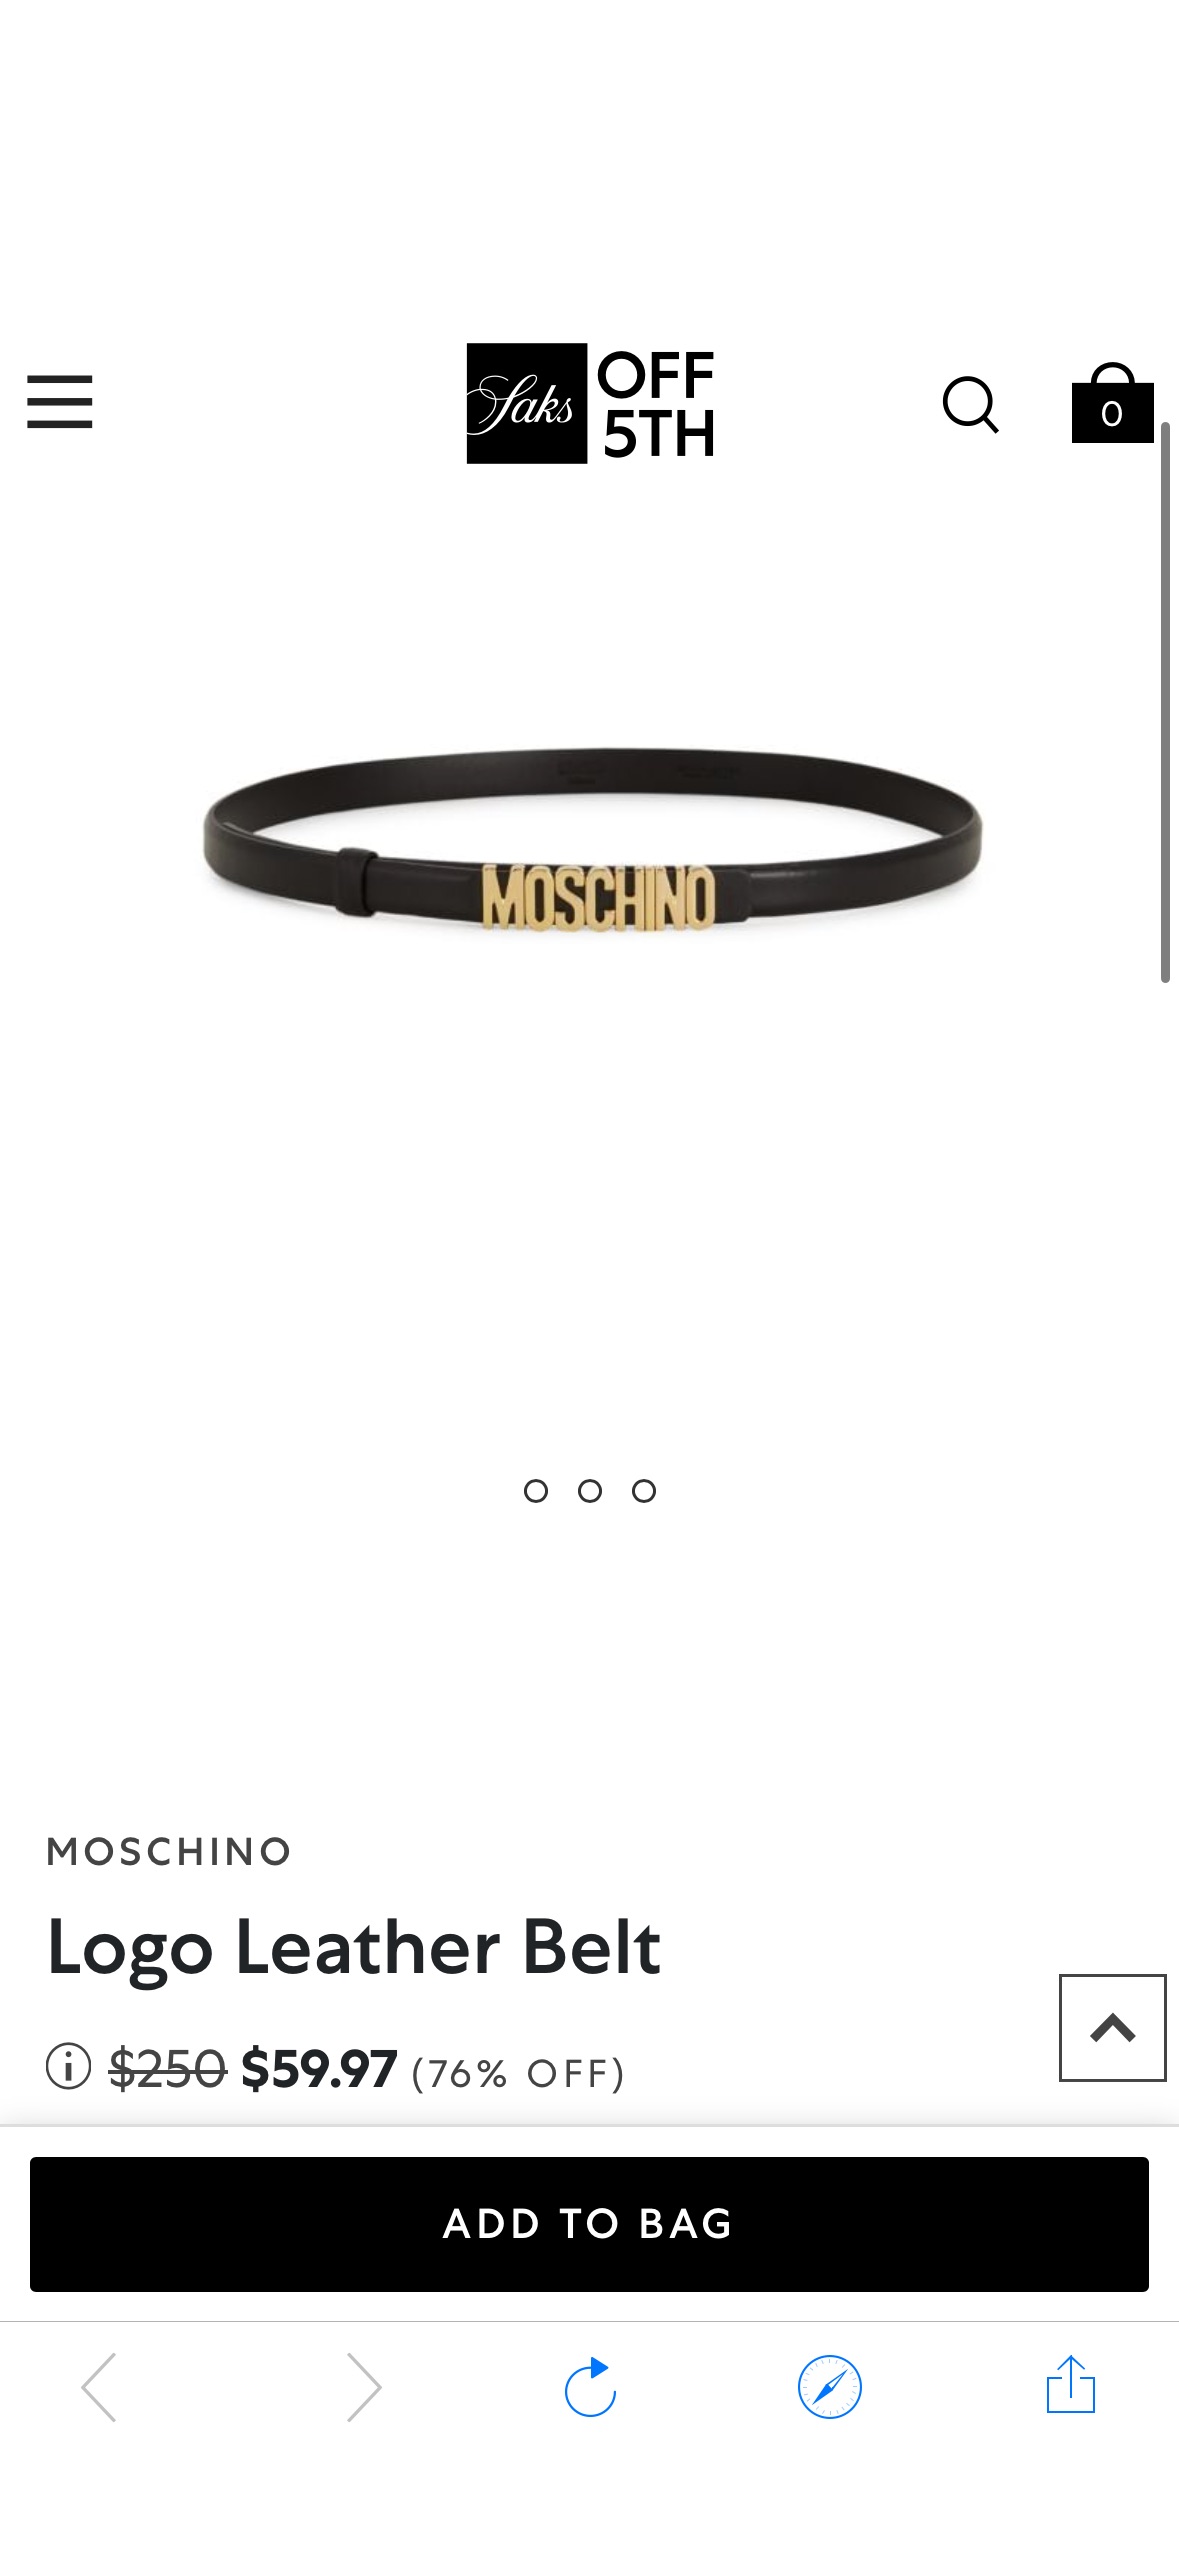 Moschino Logo Leather Belt on SALE | Saks OFF 5TH